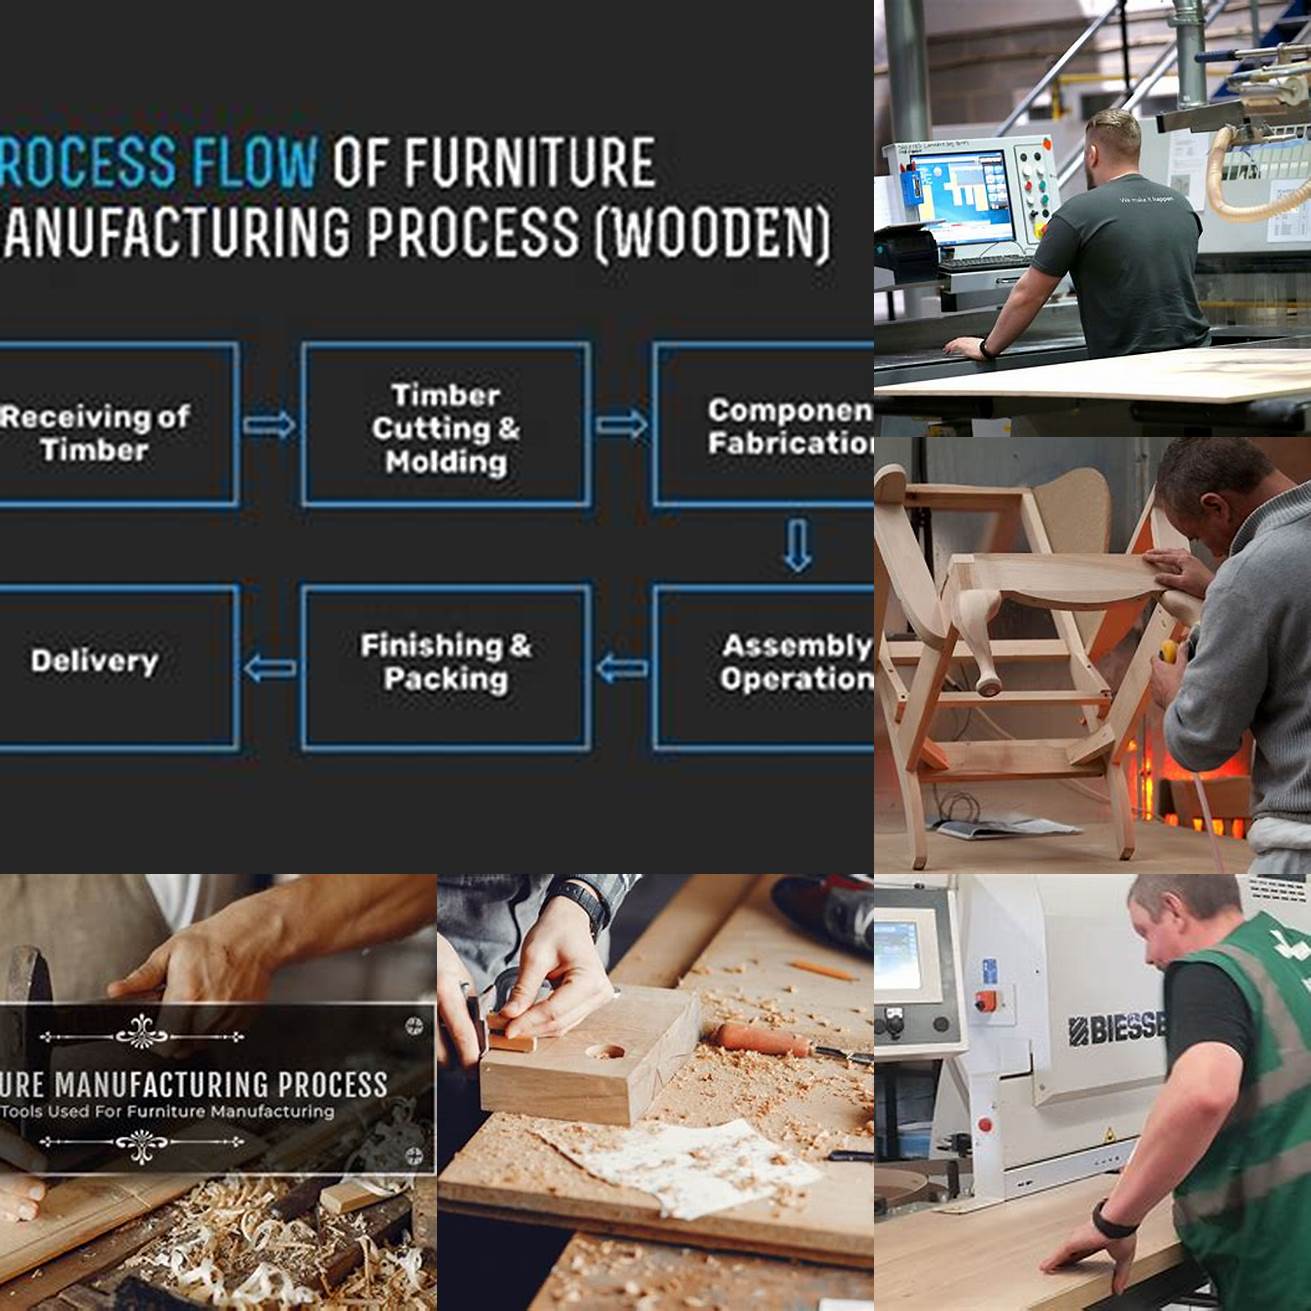 A look at the manufacturing process